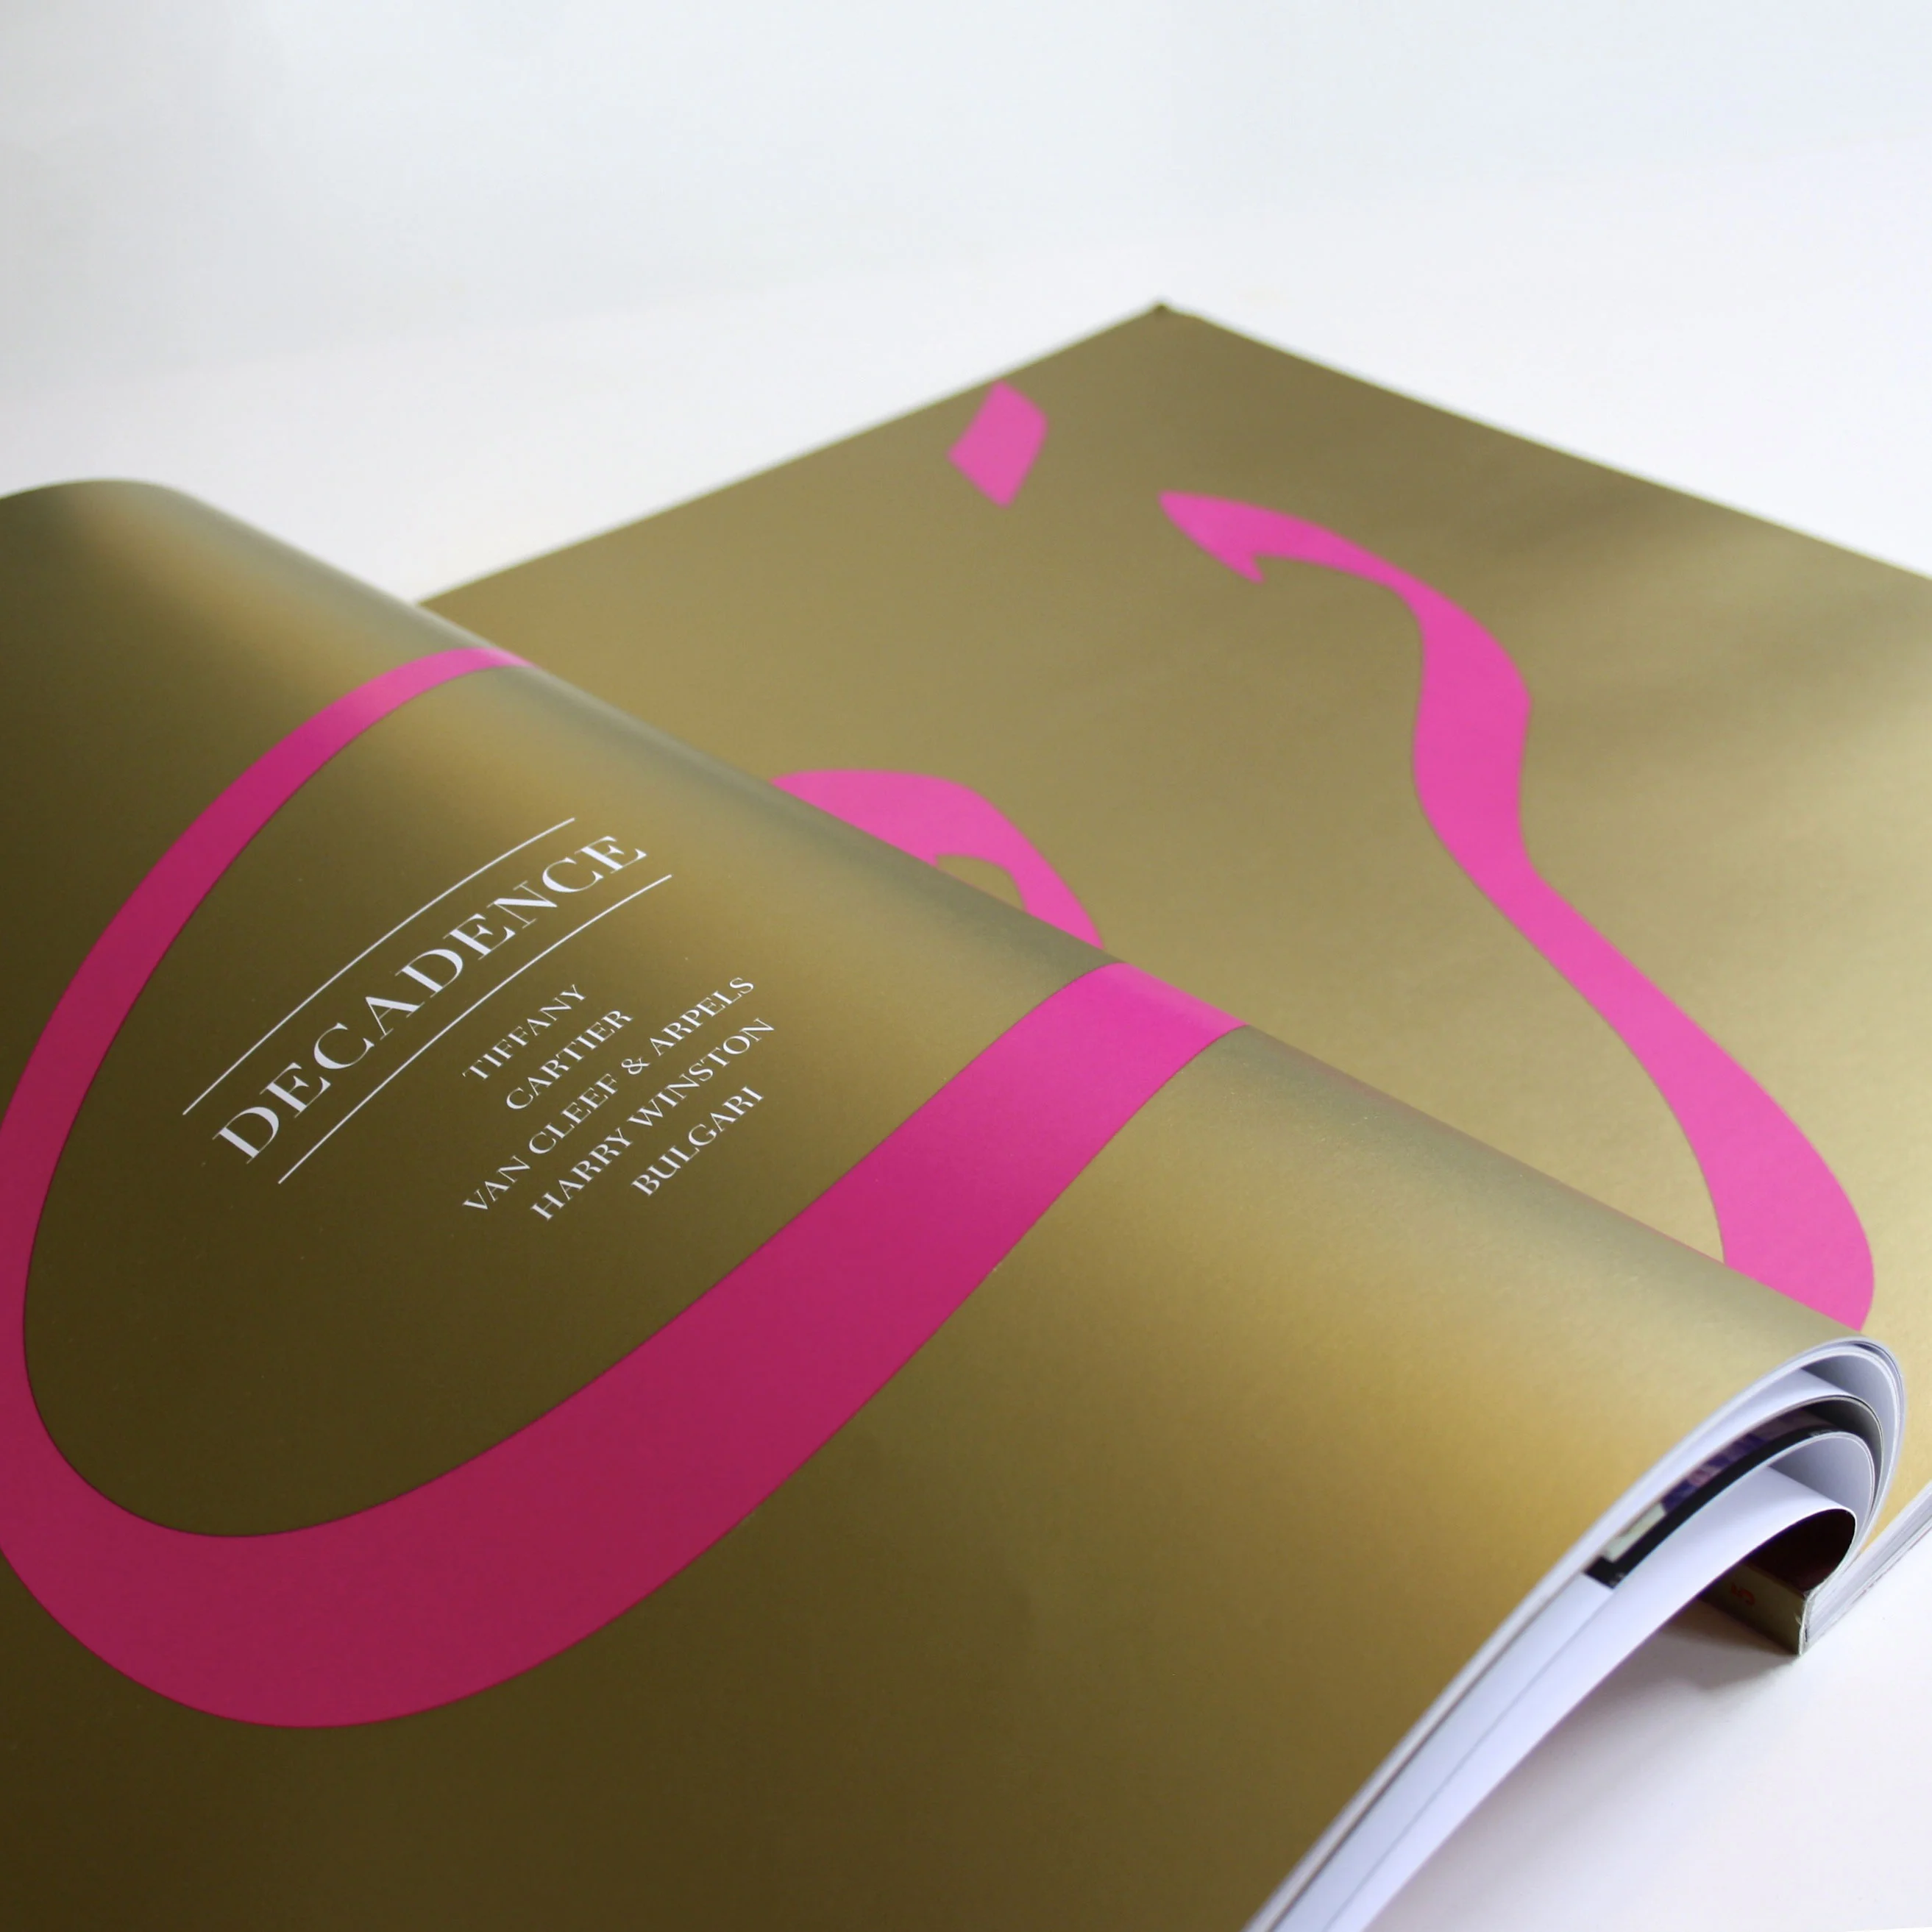 a photo of a gold section opening spread from Masquerade Magazines text in Arabic and English reads Decadence